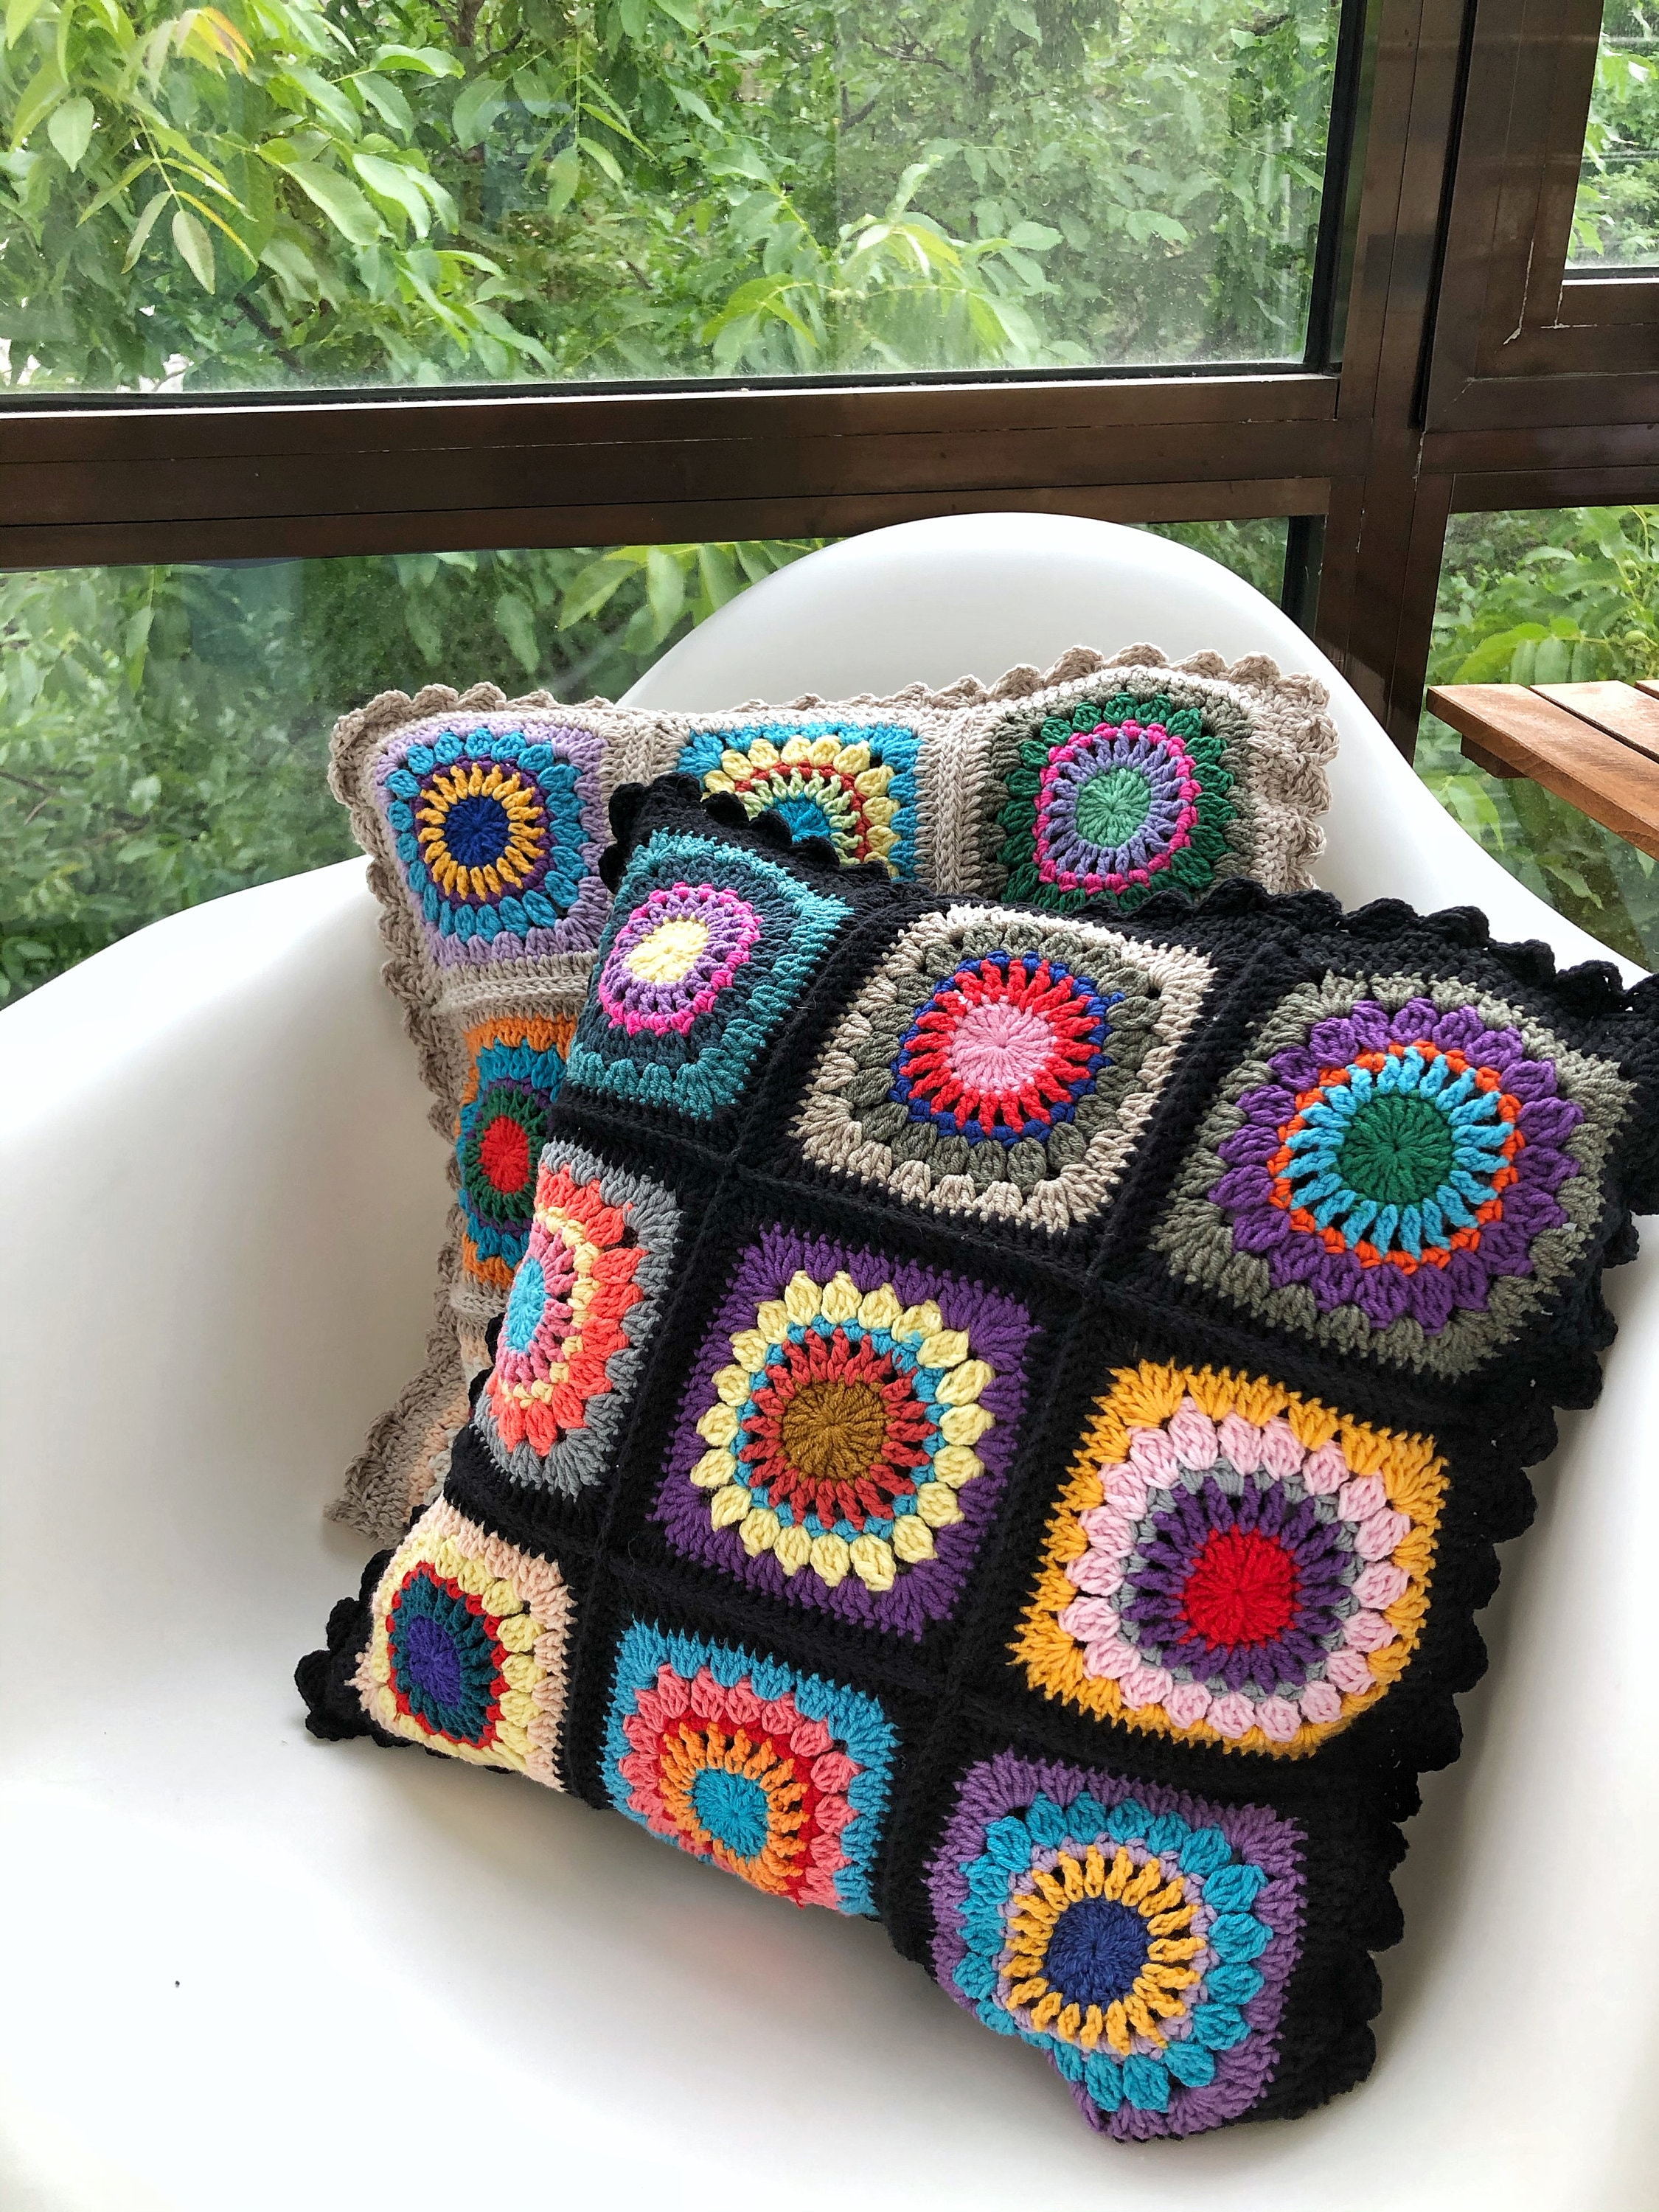 Crochet Pillow Cover Kandinsky Klimt, Squishy Colourful Artistic Handmade  Case, Bed Back Rest Support, Granny Square Maternity Knee Cushion 